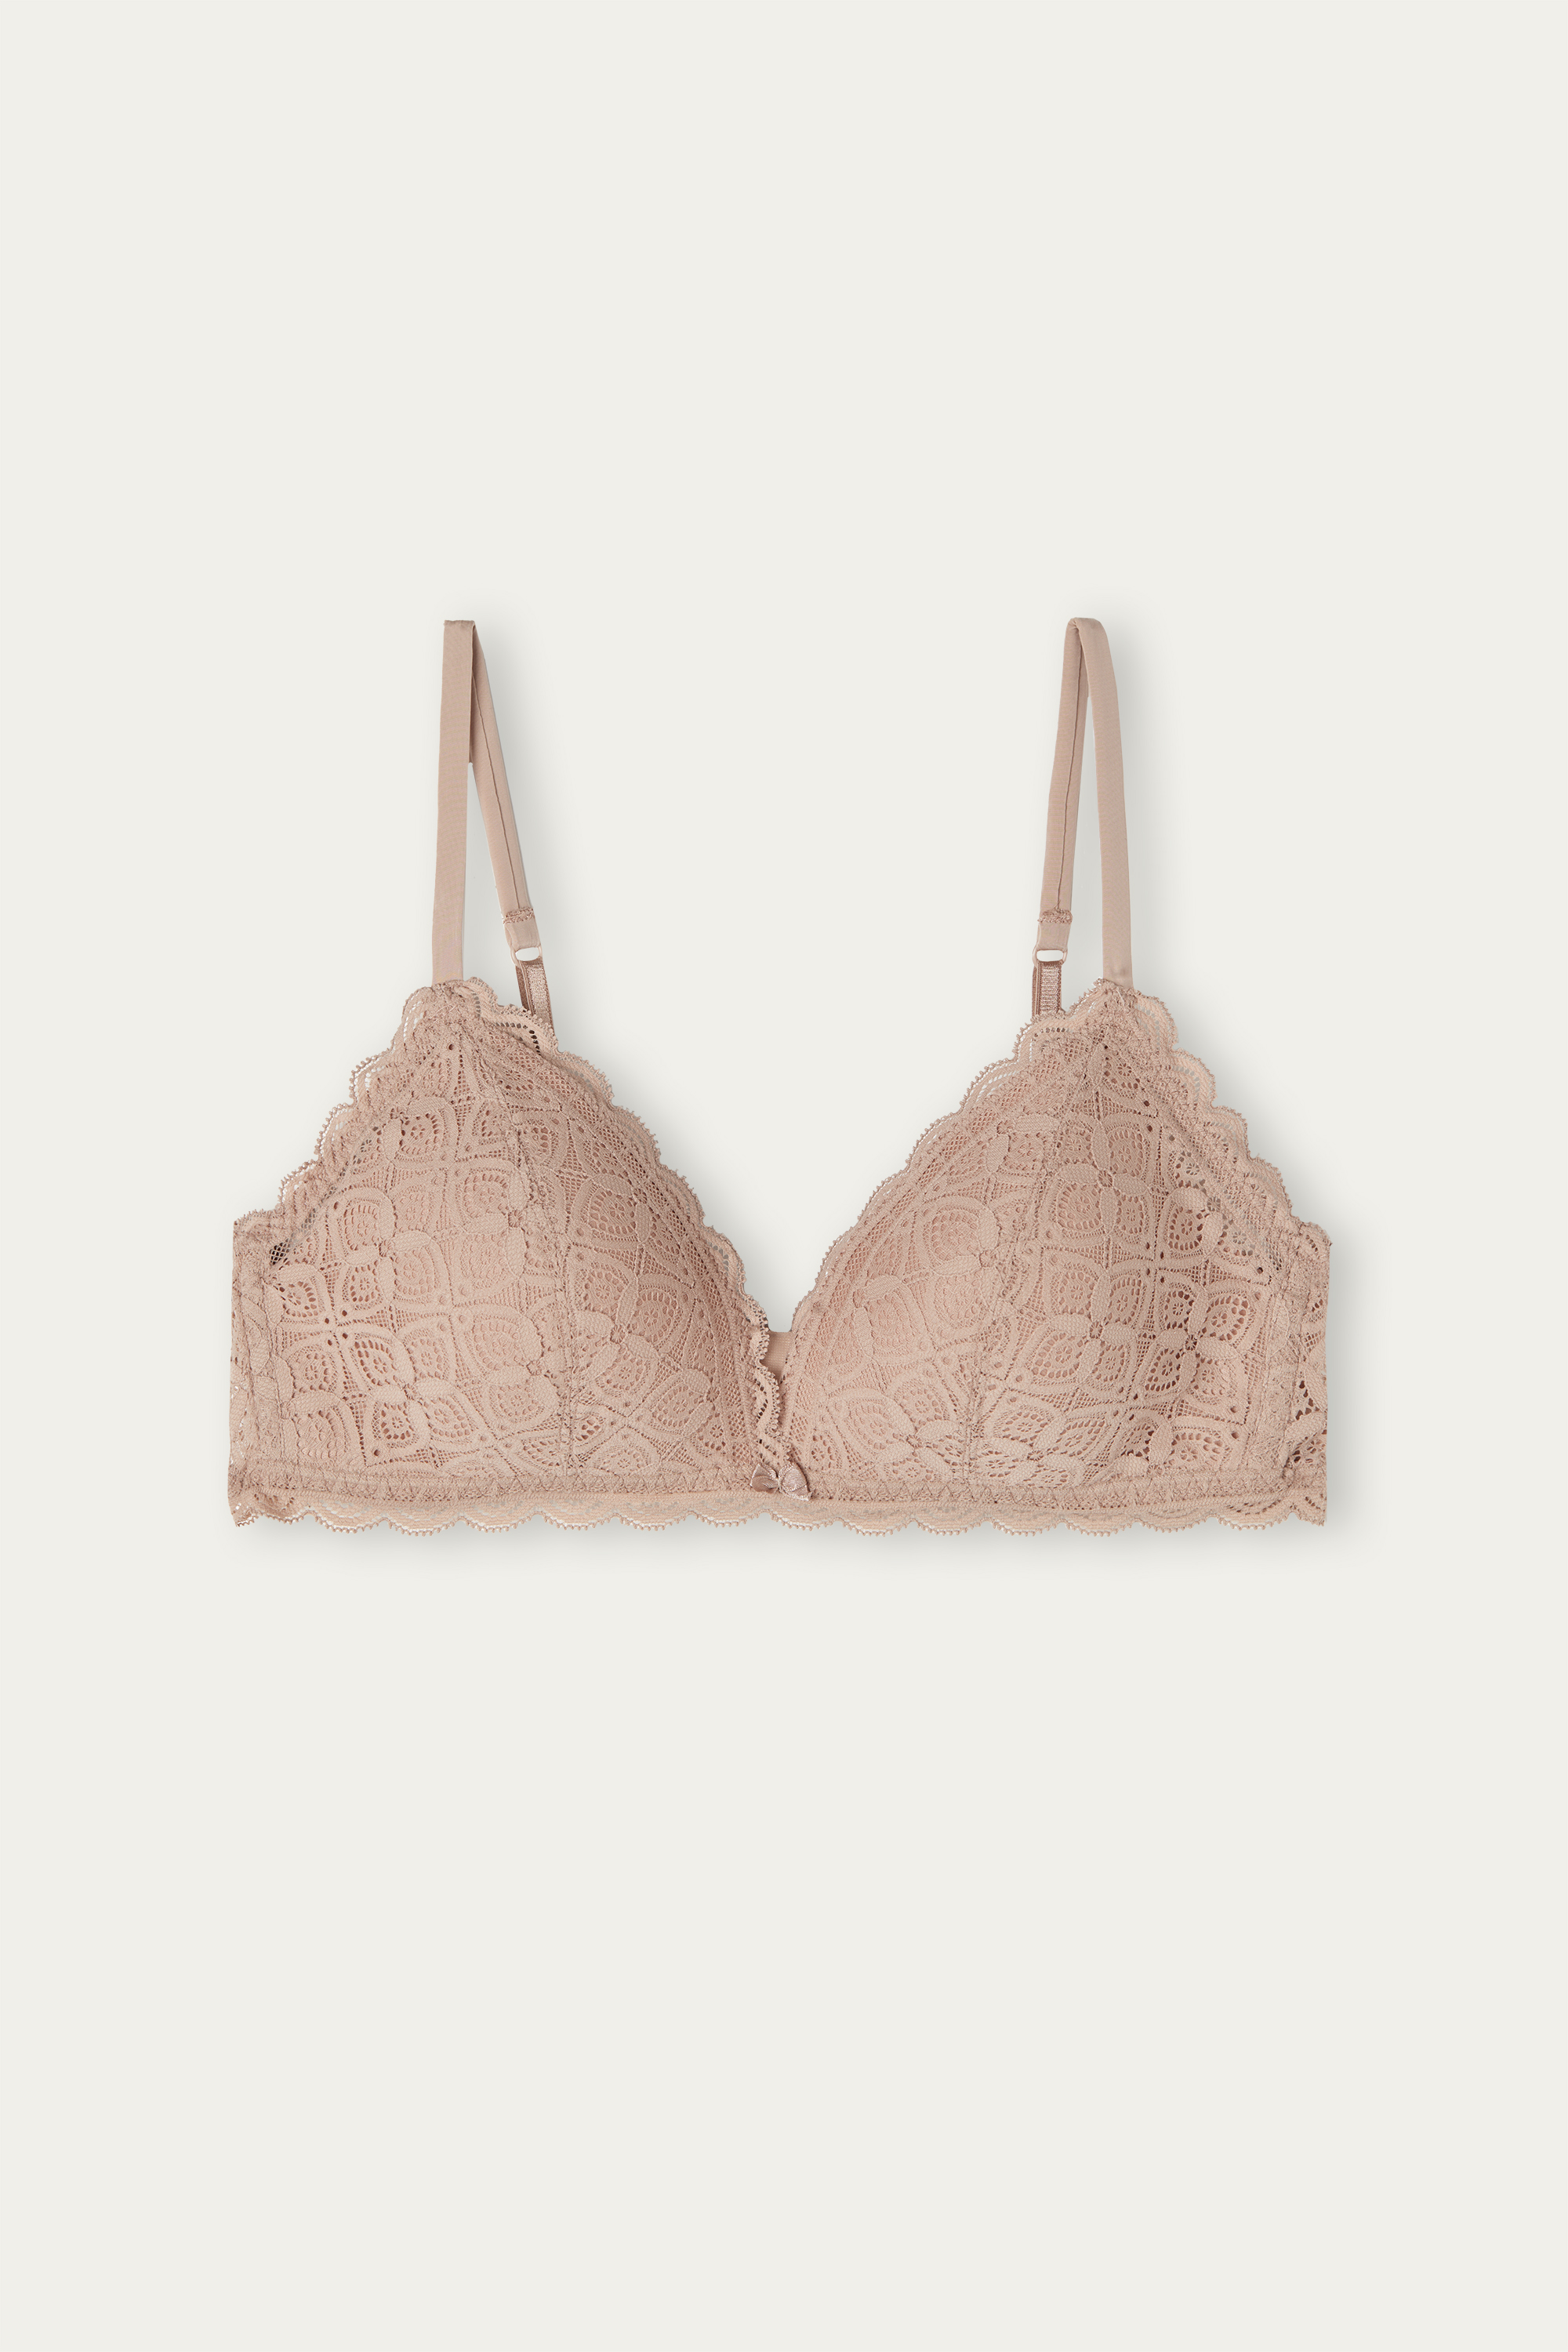 H&m/primarks Absolute Lace Super Pushup Bombshell Bra Push Up Bh